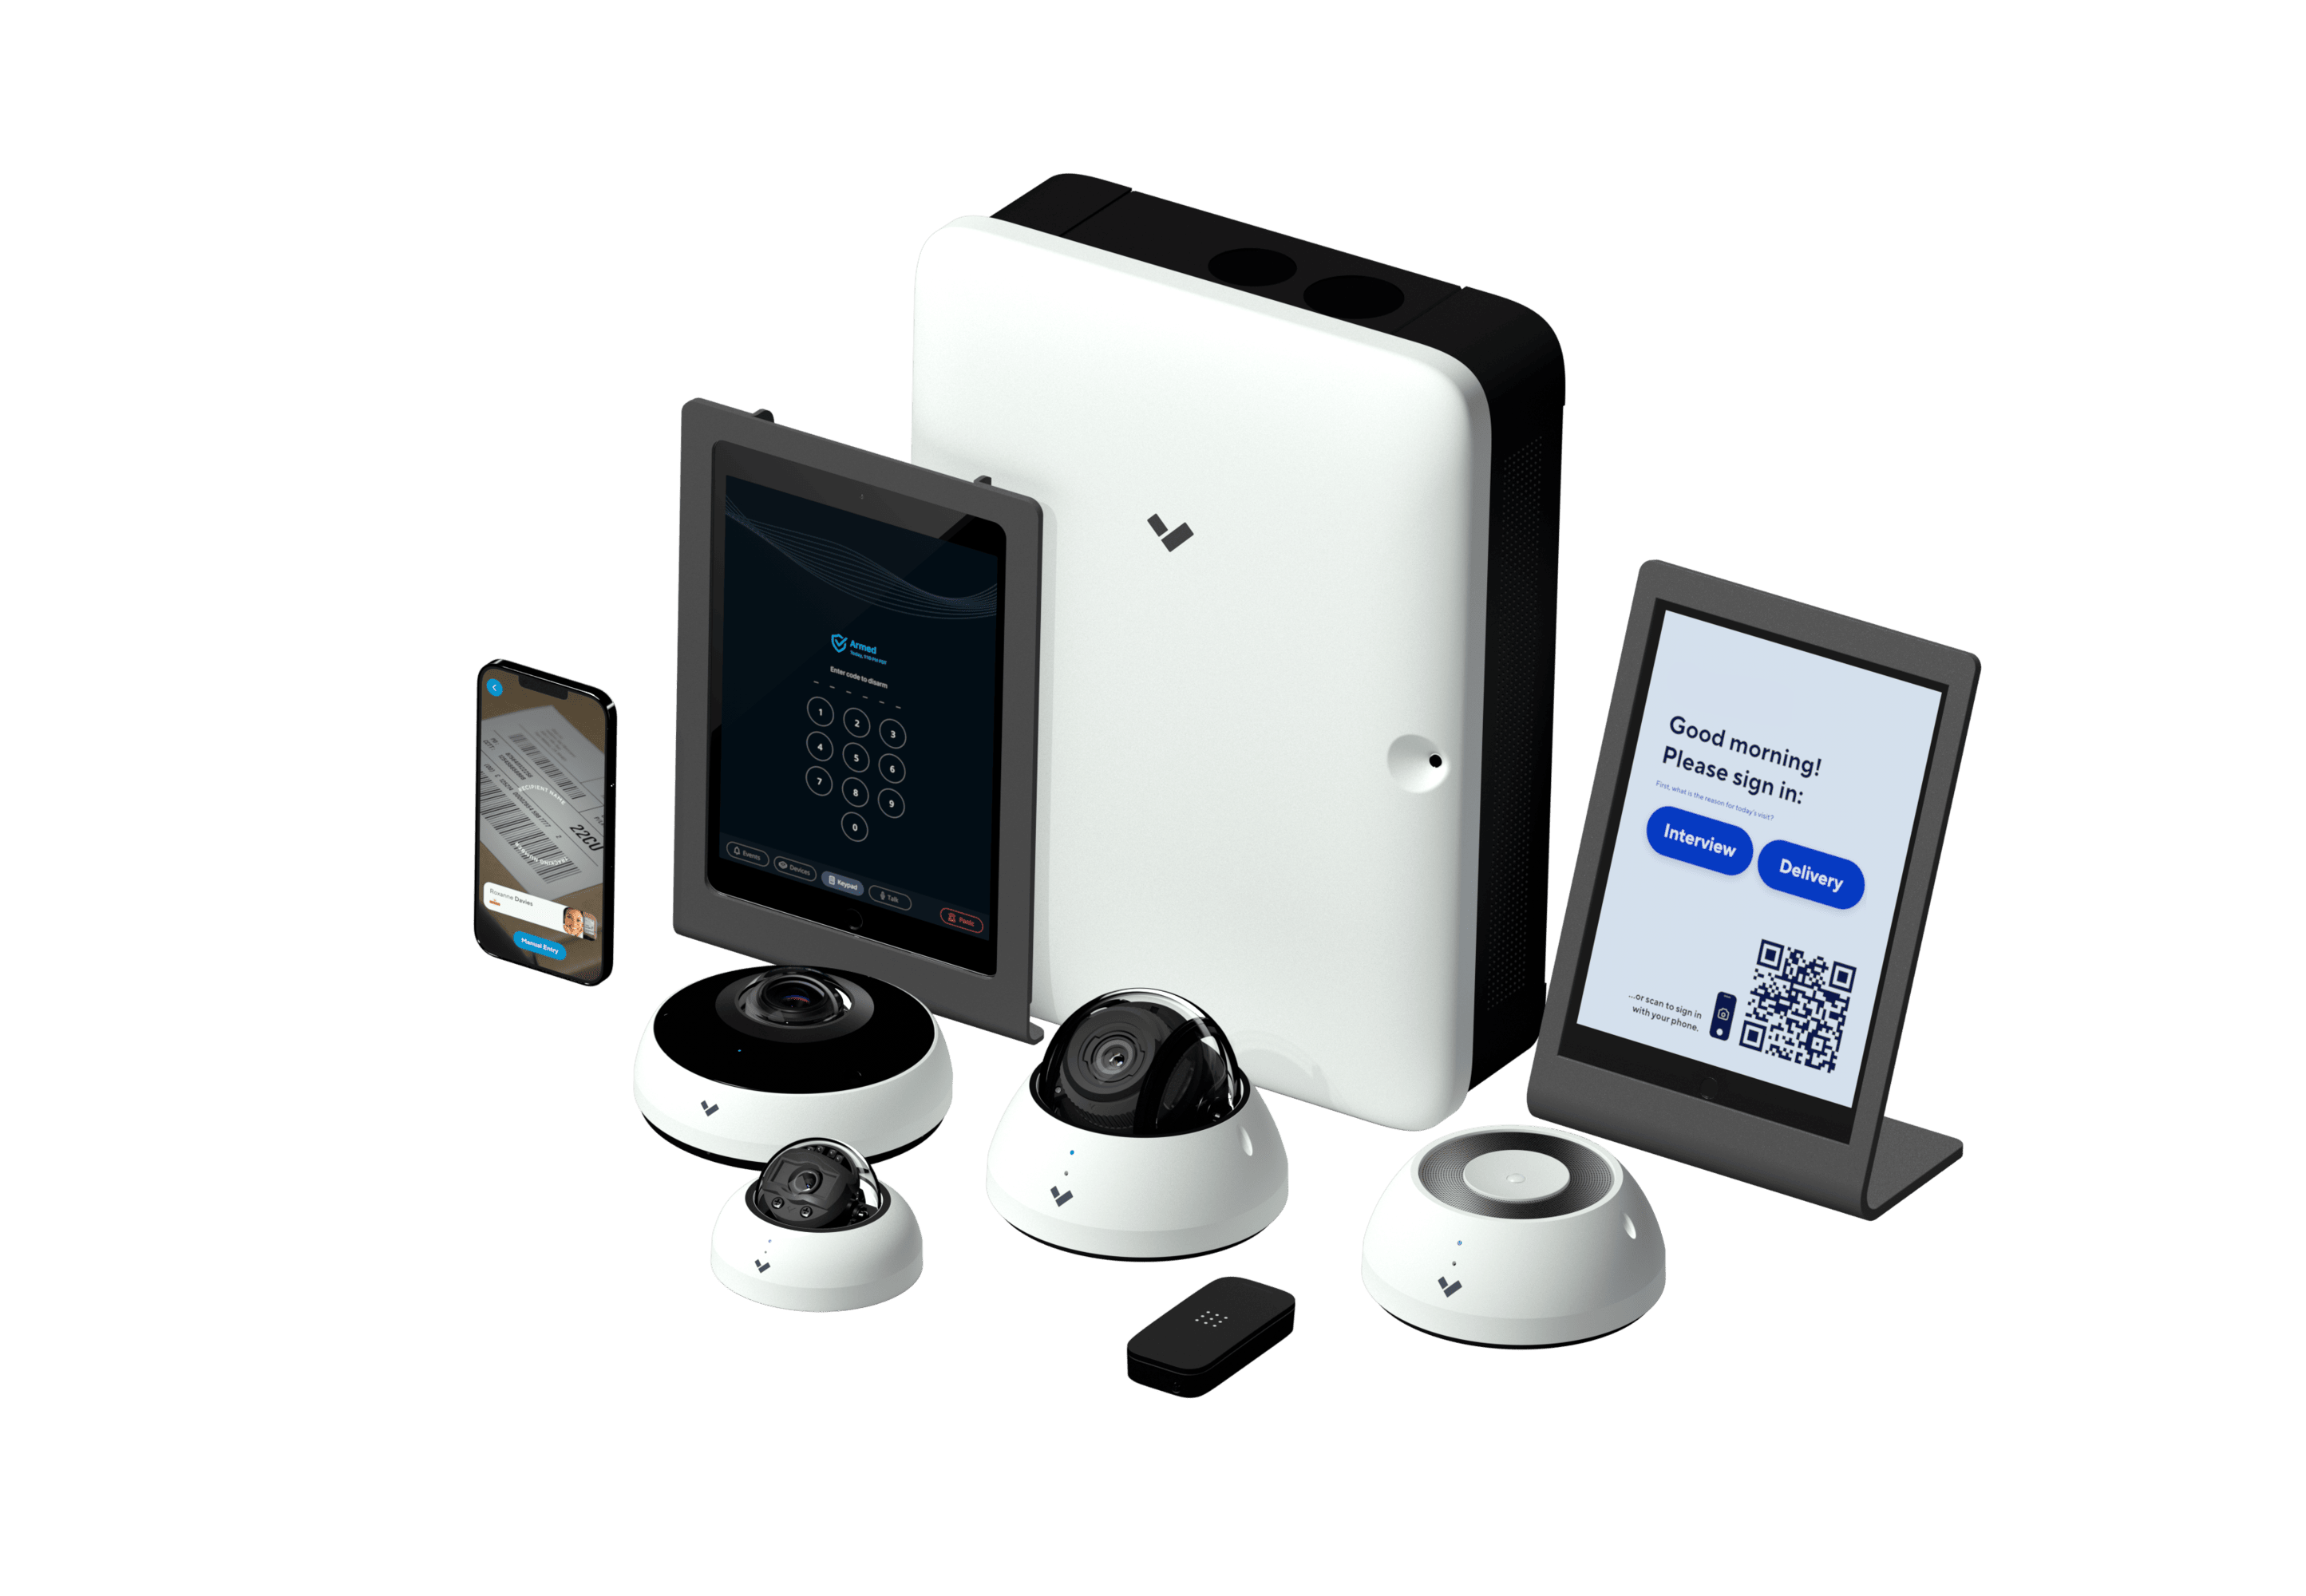 Verkada device family for security systems in San Francisco